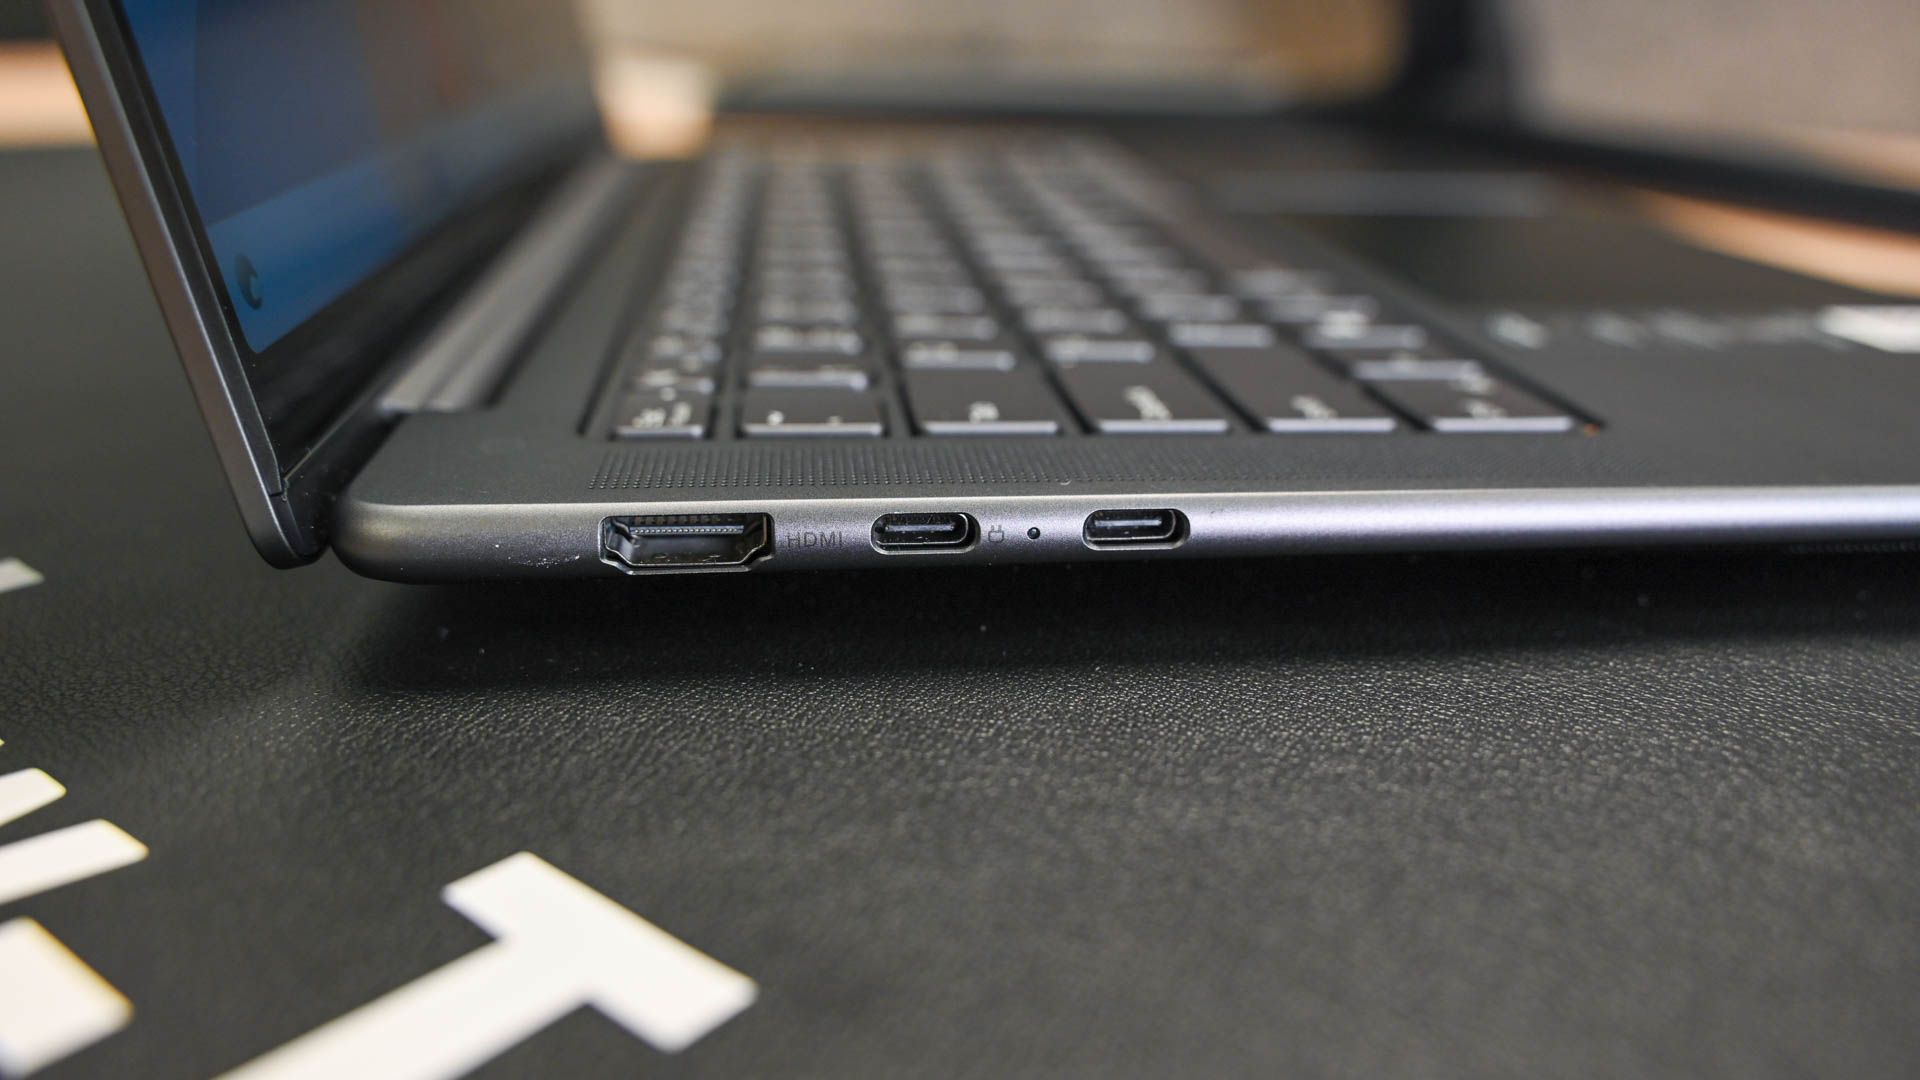  HDMI and USB c ports on the side of the Lenovo Slim Pro 7